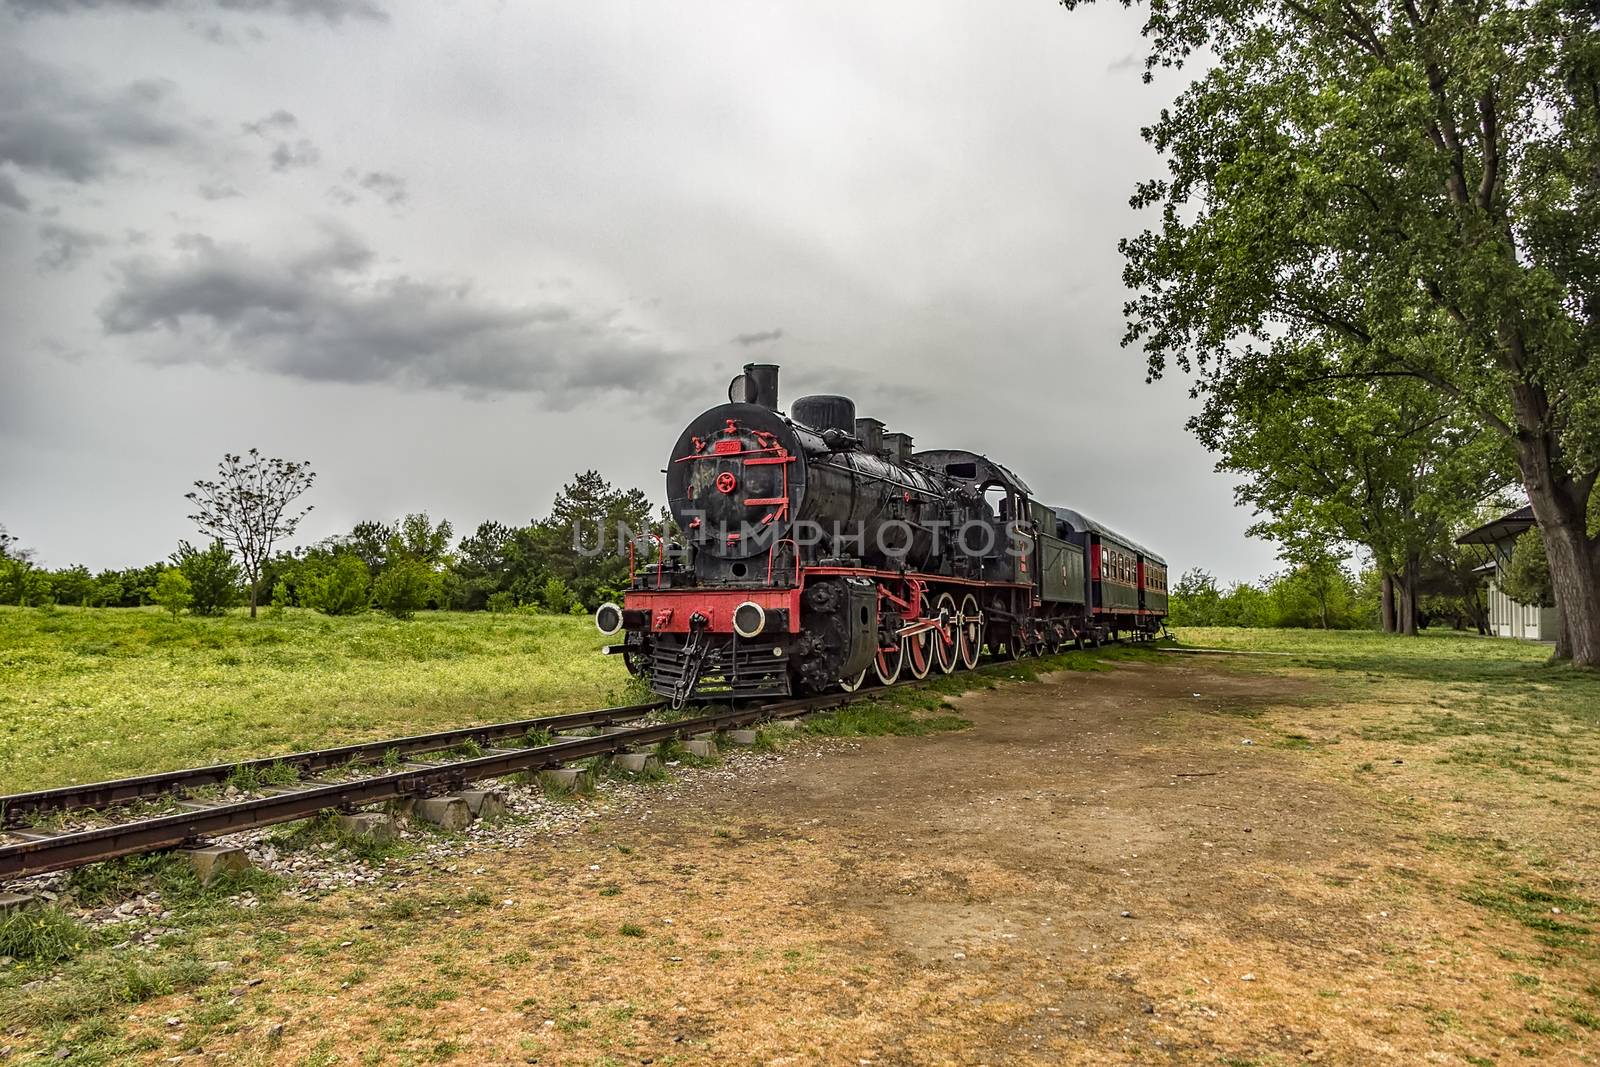 Train and steam locomotive by EdVal